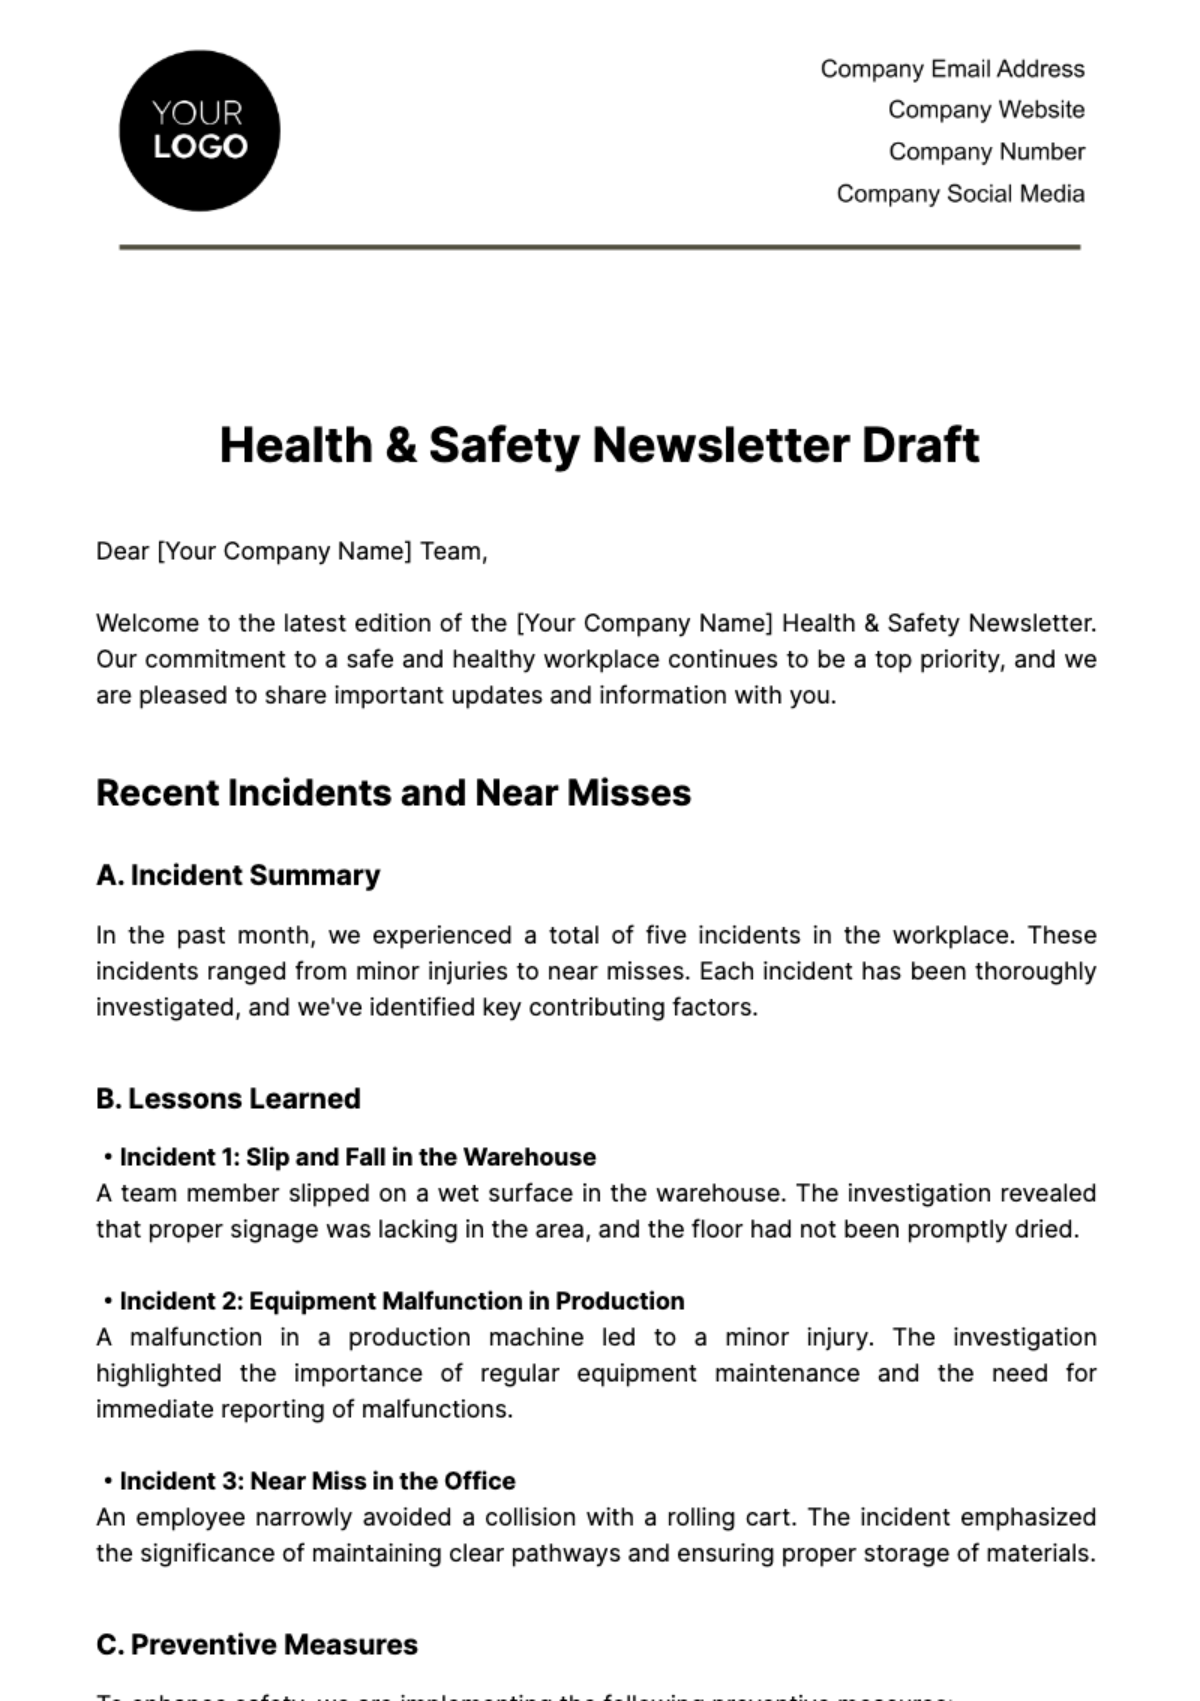 Free Health & Safety Newsletter Draft Template